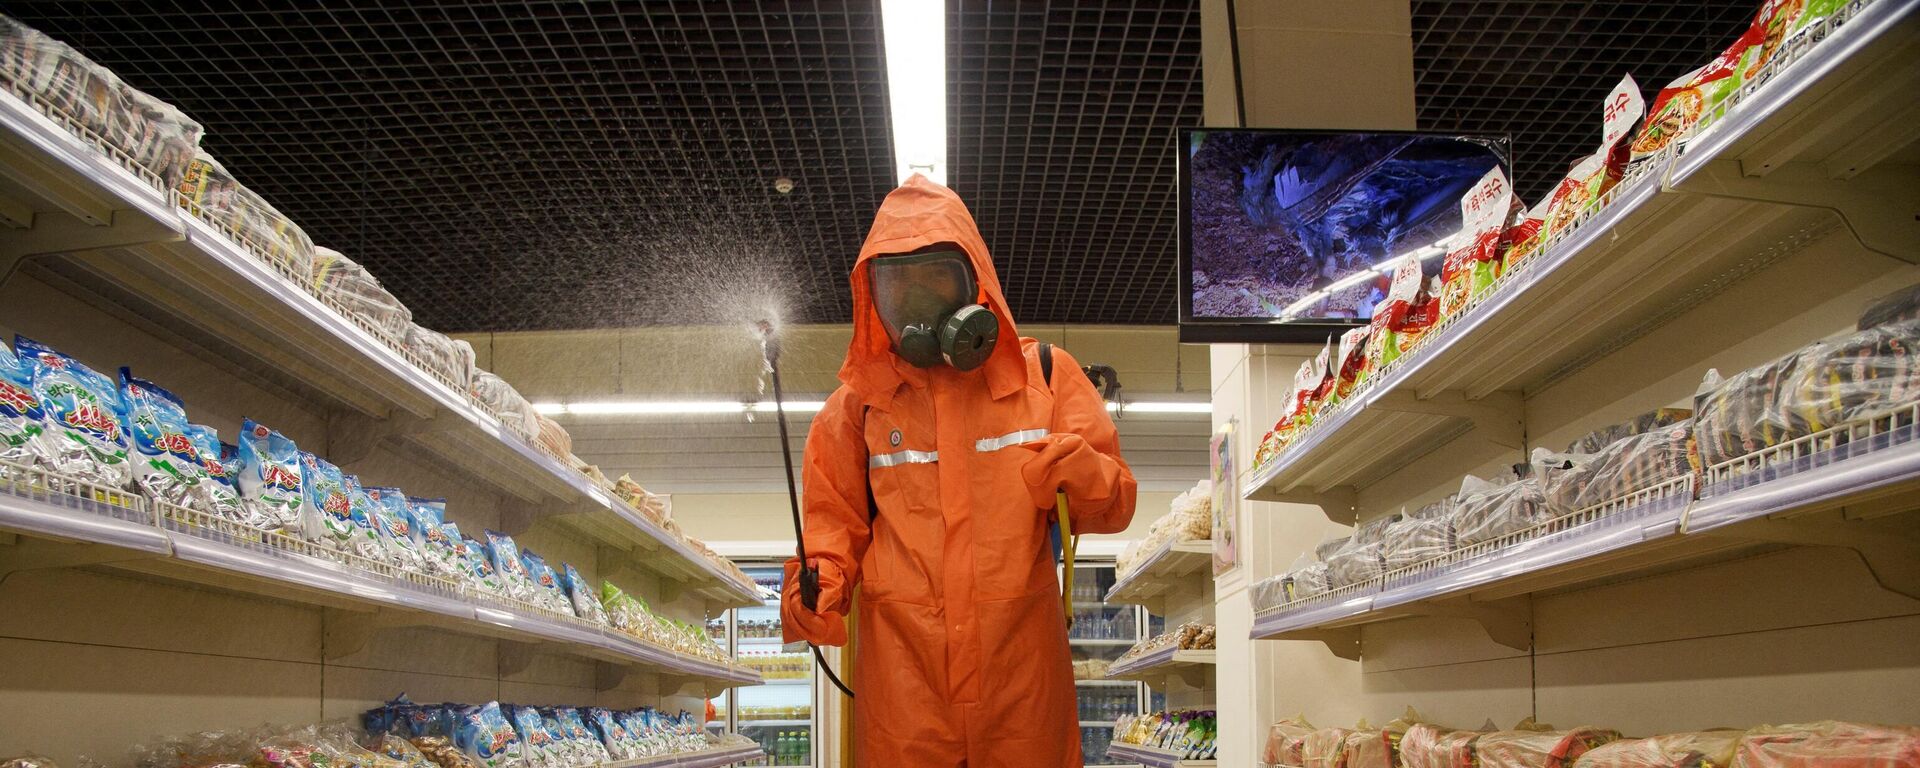 In this file picture taken on September 27, 2021, a health official sprays disinfectant as part of preventative measures against Covid-19, in the Daesong Department Store in Pyongyang. - Sputnik International, 1920, 14.05.2022